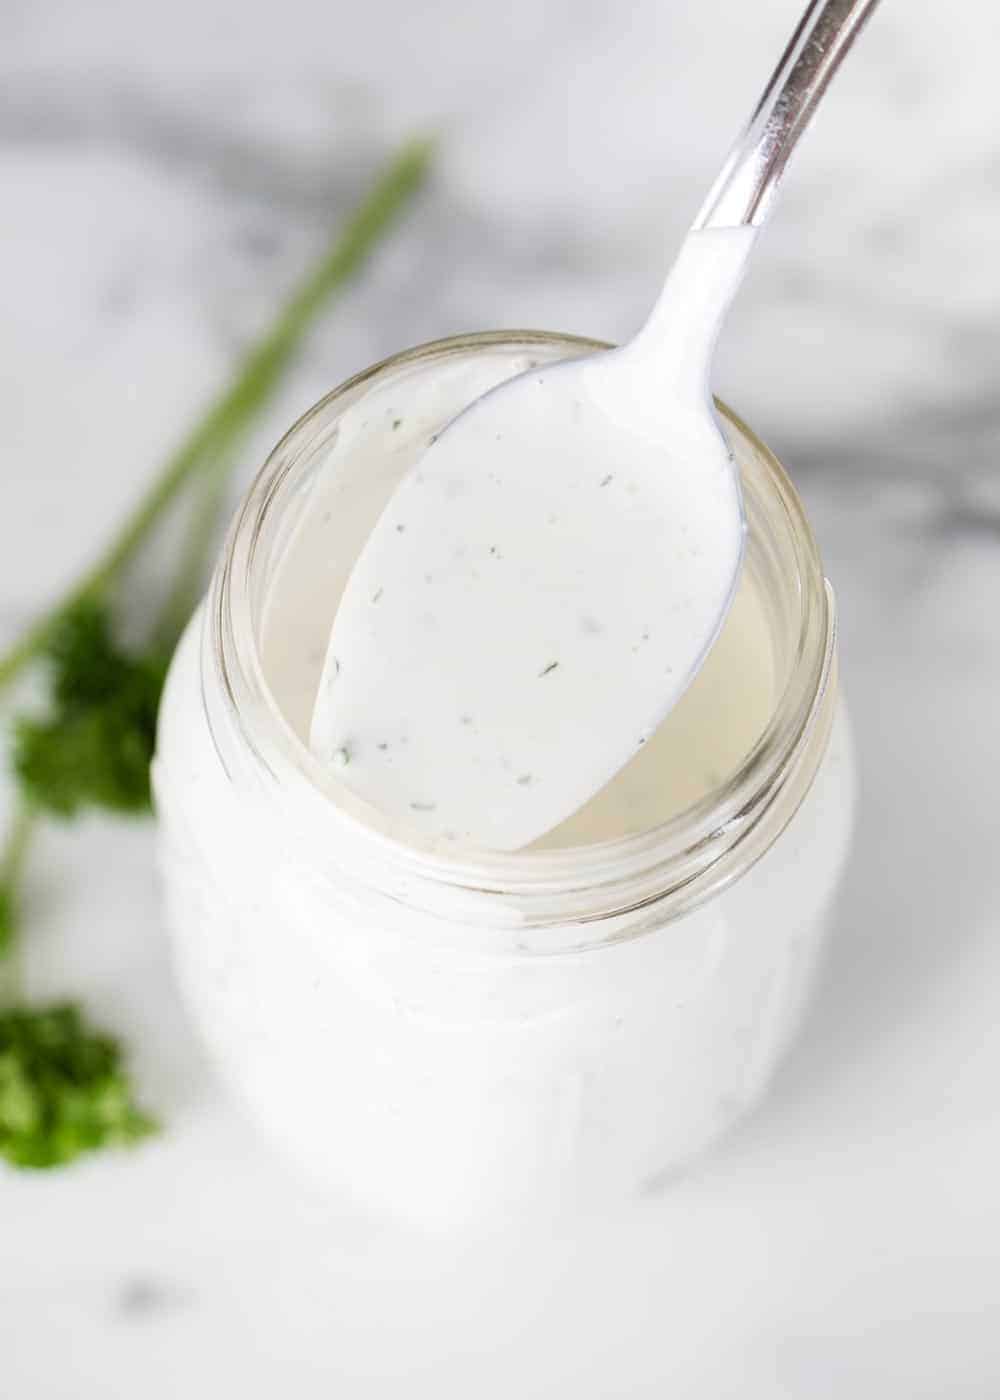 Ranch dressing on spoon.